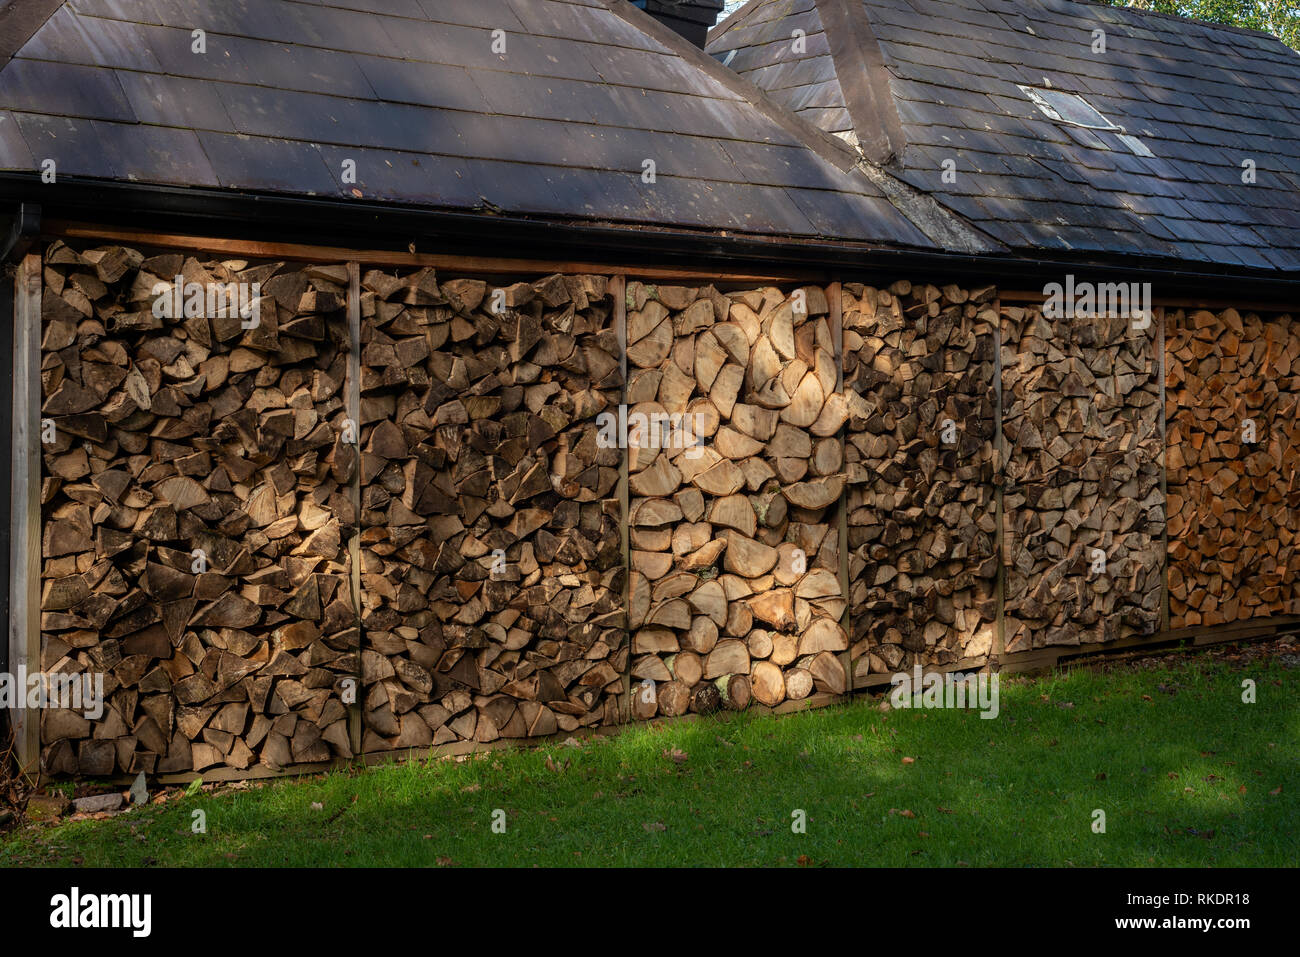 Pile of firewood cut tree logs. Stack of wood as firewood material by barn wall as home self sufficient energy in rural Ireland. Stock Photo